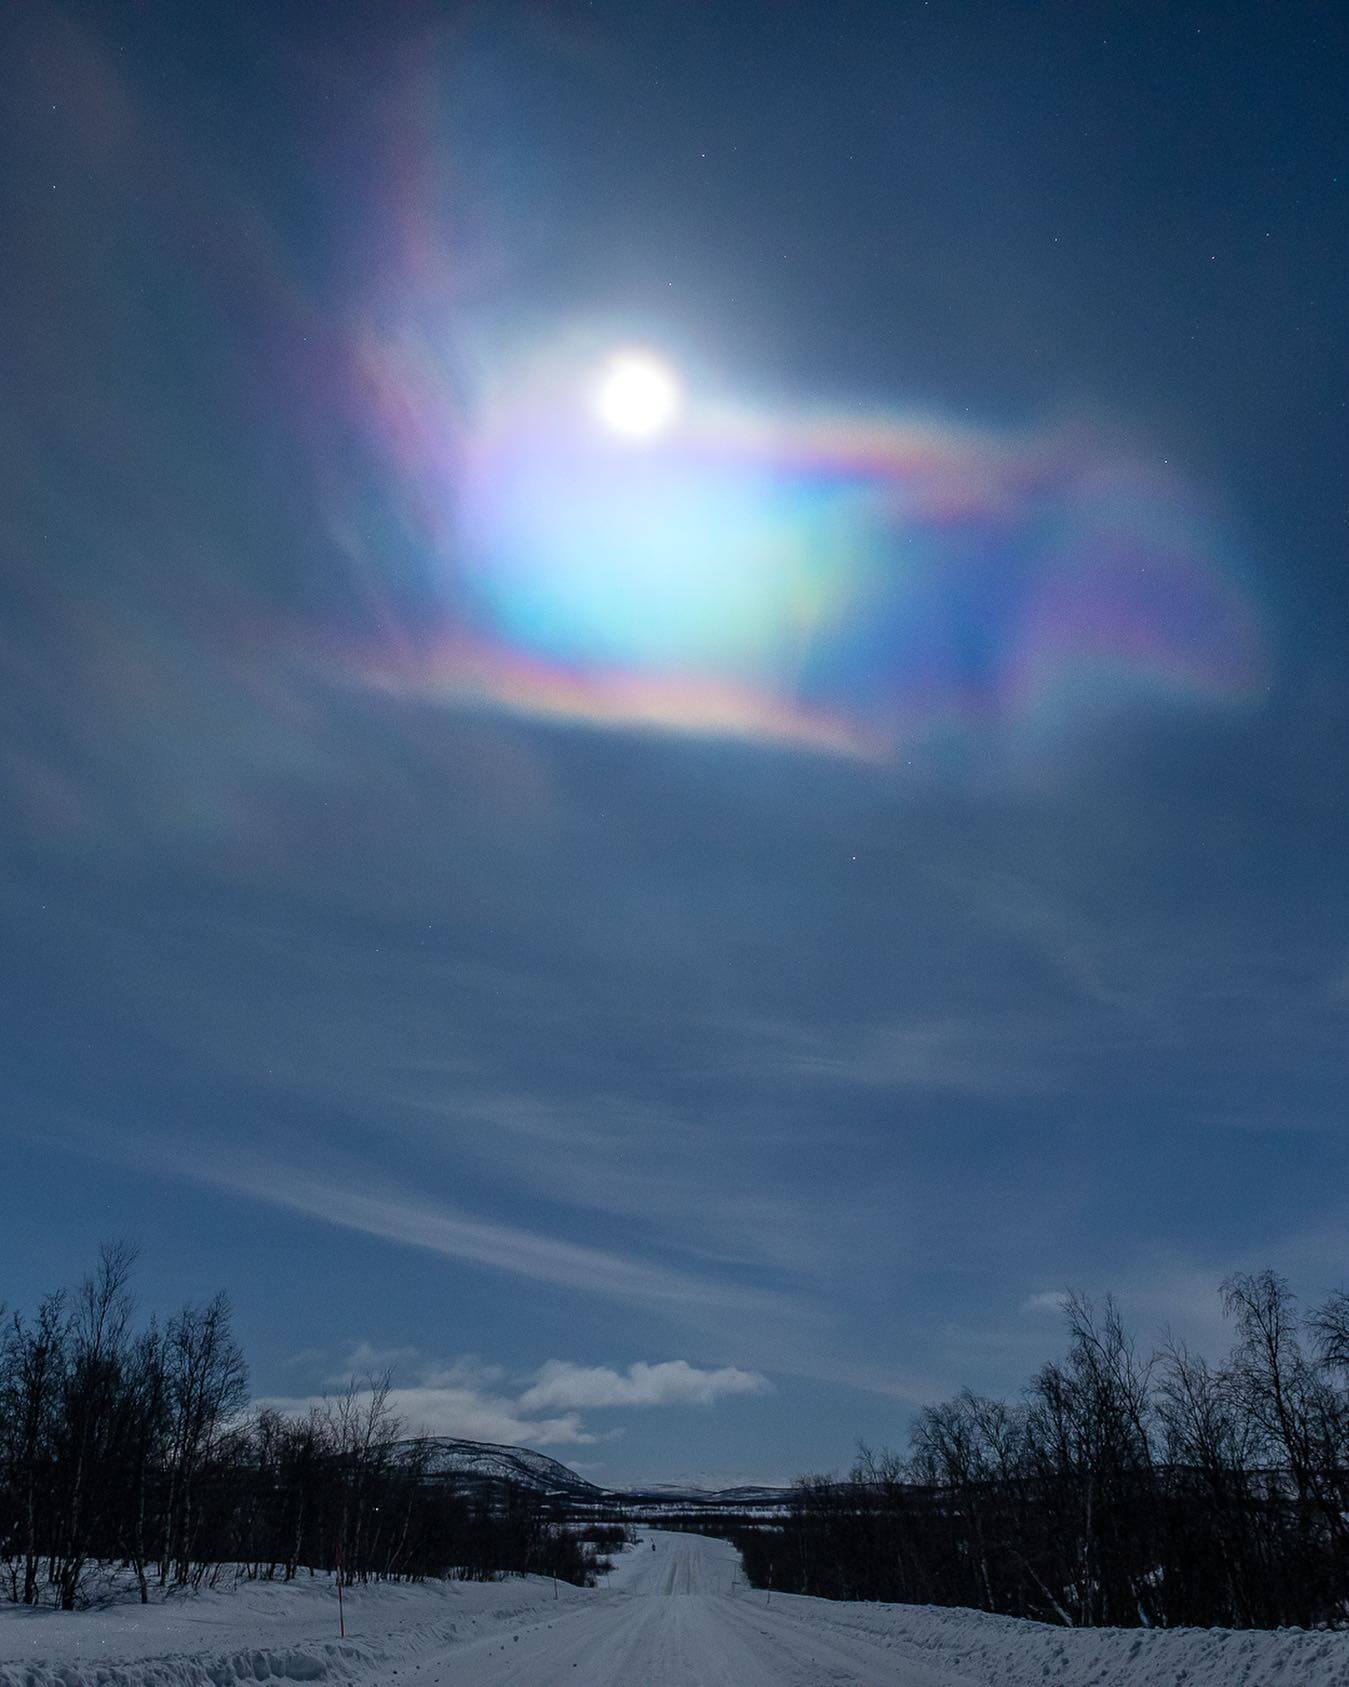 Some different colours in the sky few days ago.🤯

“Polar stratospheric clouds (PSCs) are clouds in the winter polar stratosphere at altitudes of 15,000–25,000 m (49,000–82,000 ft). They are best observed during civil twilight, when the Sun is between 1 and 6 degrees below the horizon, as well as in winter and in more northerly latitudes.[1] One main type of PSC is made up mostly of supercooled droplets of water and nitric acid and is implicated in the formation of ozone holes.[2] The other main type consists only of ice crystals which are not harmful. This type of PSC is also referred to as nacreous (/ˈneɪkriəs/, from nacre, or mother of pearl, due to its iridescence).”
•
•
•
•

#tromsø #northernnorway #visittromso #northnorway2day #northernlights #tromsolove #naturephotography #lovenature #aurora #worldaurora #norge #norgefoto #worldaurora #visitnorway #auroraborealis #ig_nordnorge #canon #mittnorge #norwayphotos #auroraborealblog #norway #dreamchasersnorway #thebestofnorway #tromsomoment #ig_auroraborealis #natgeotravel #nortrip